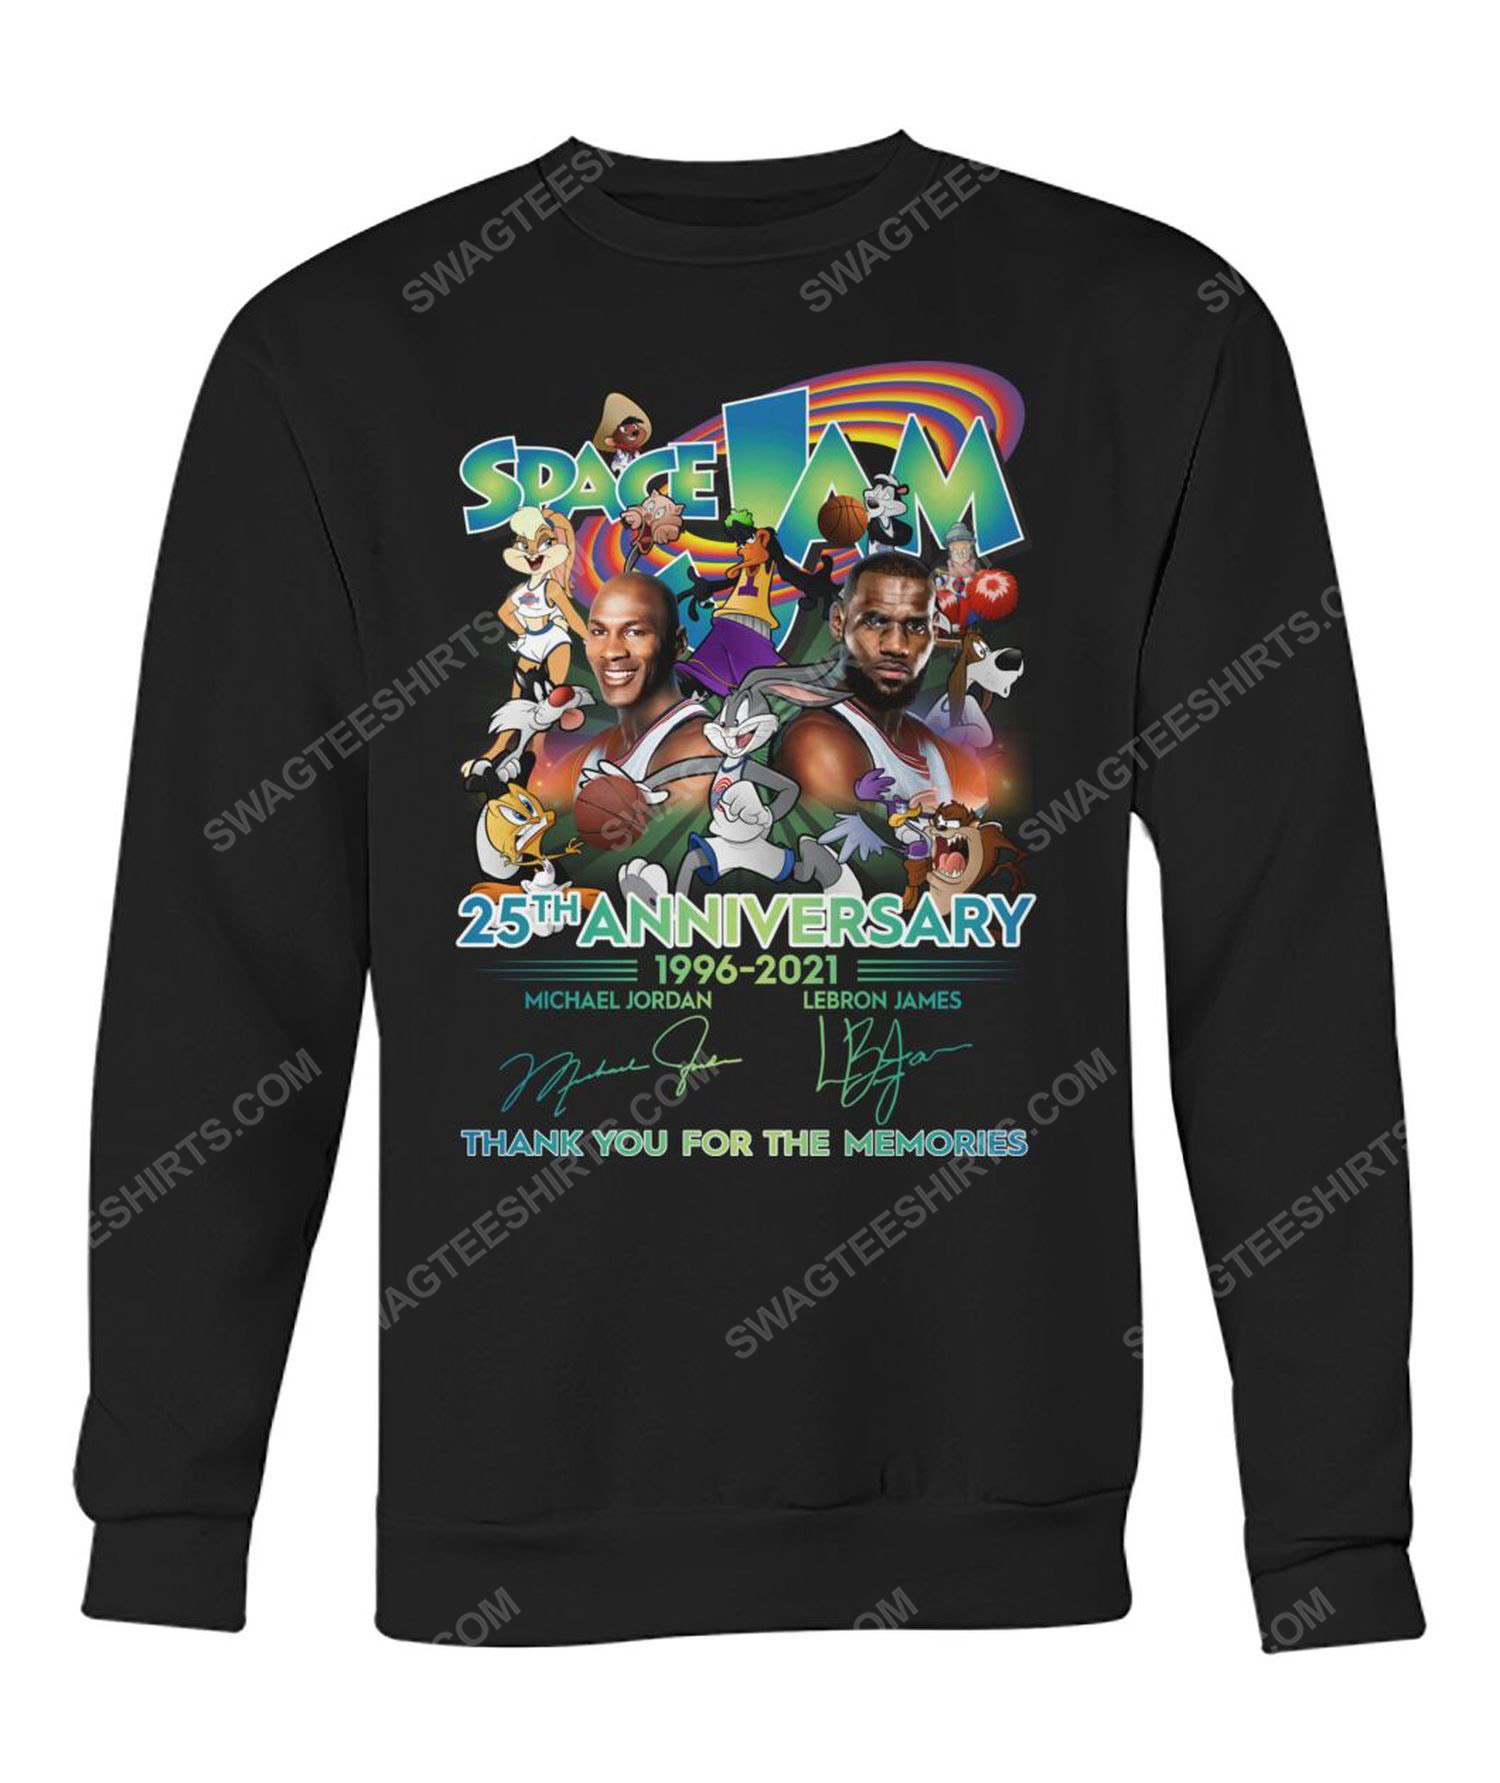 Space jam thank you for the memories sweatshirt